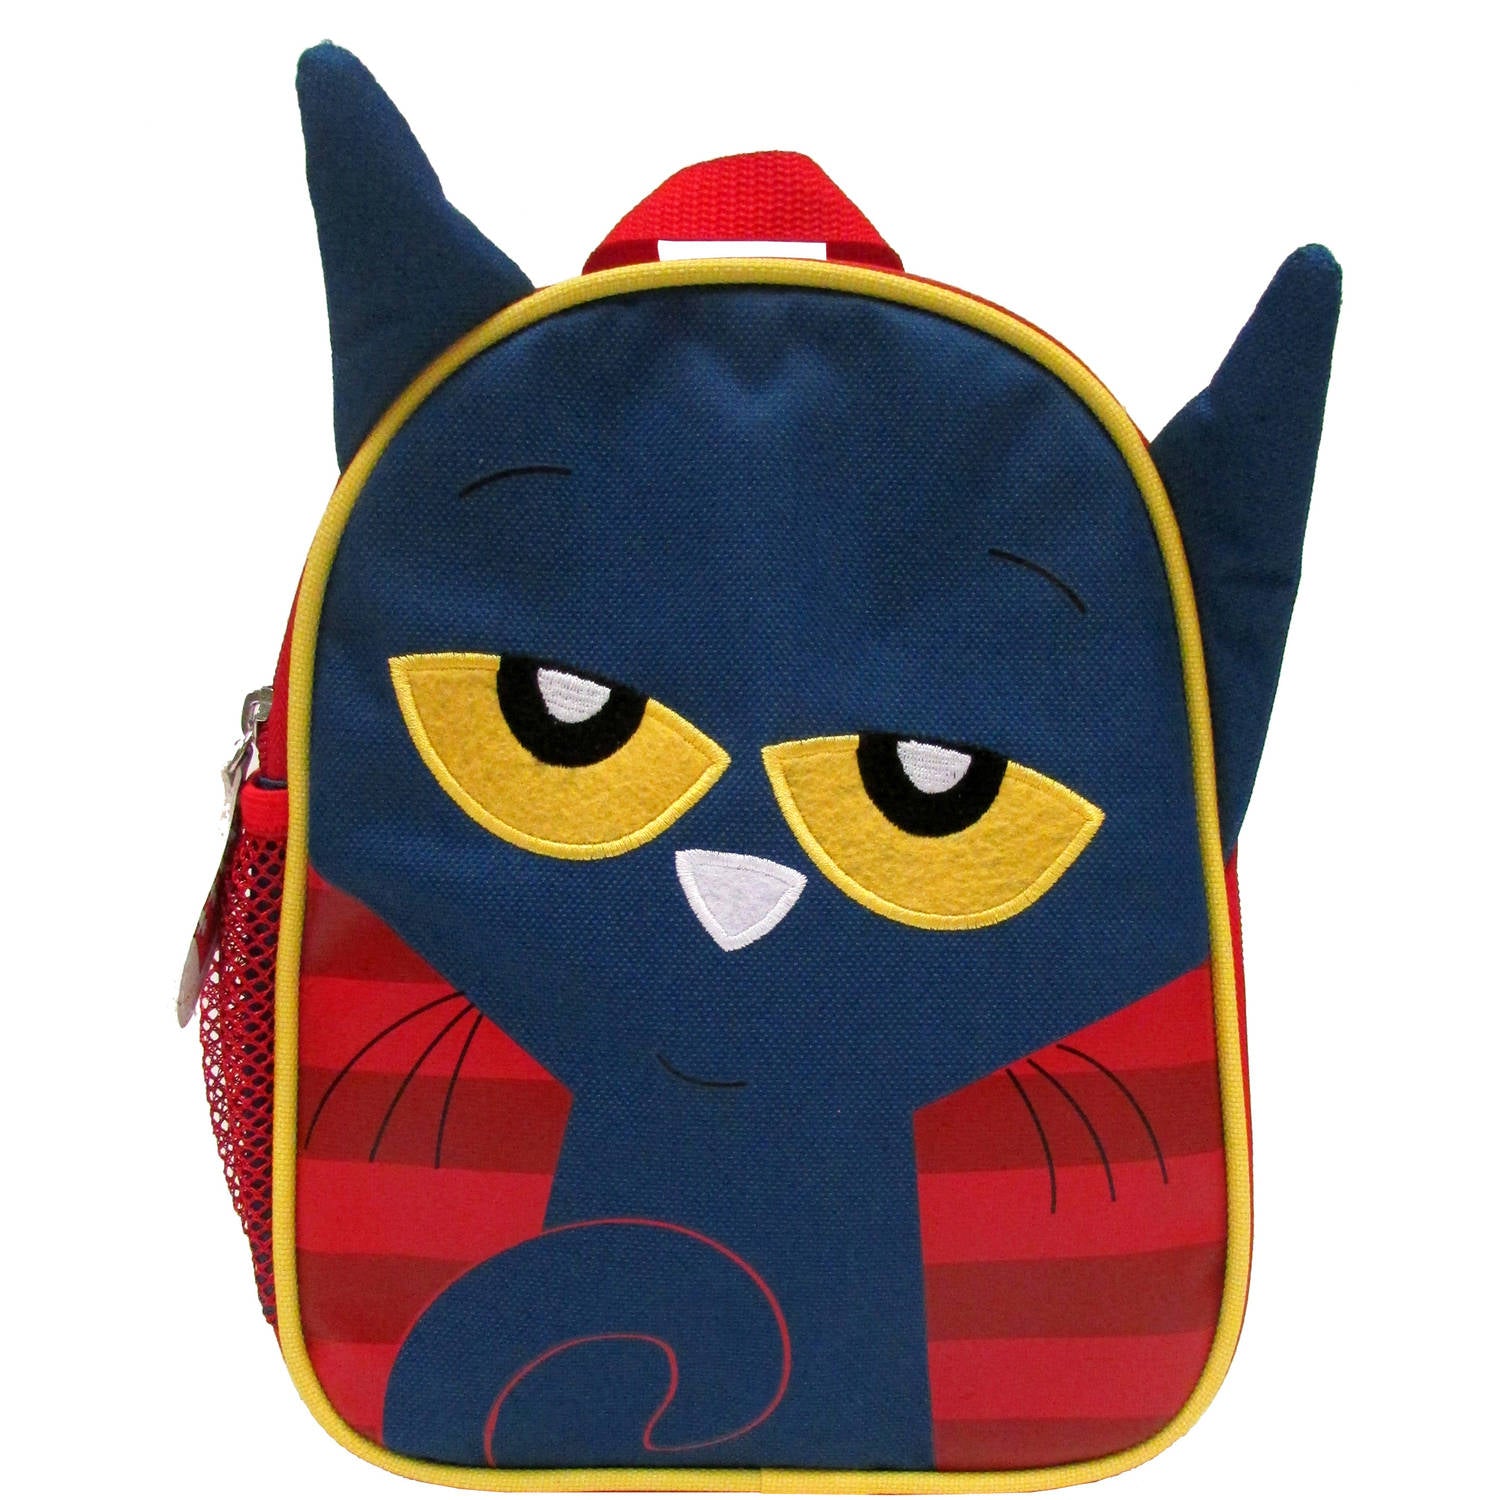 PETE THE CAT LUNCH BAG